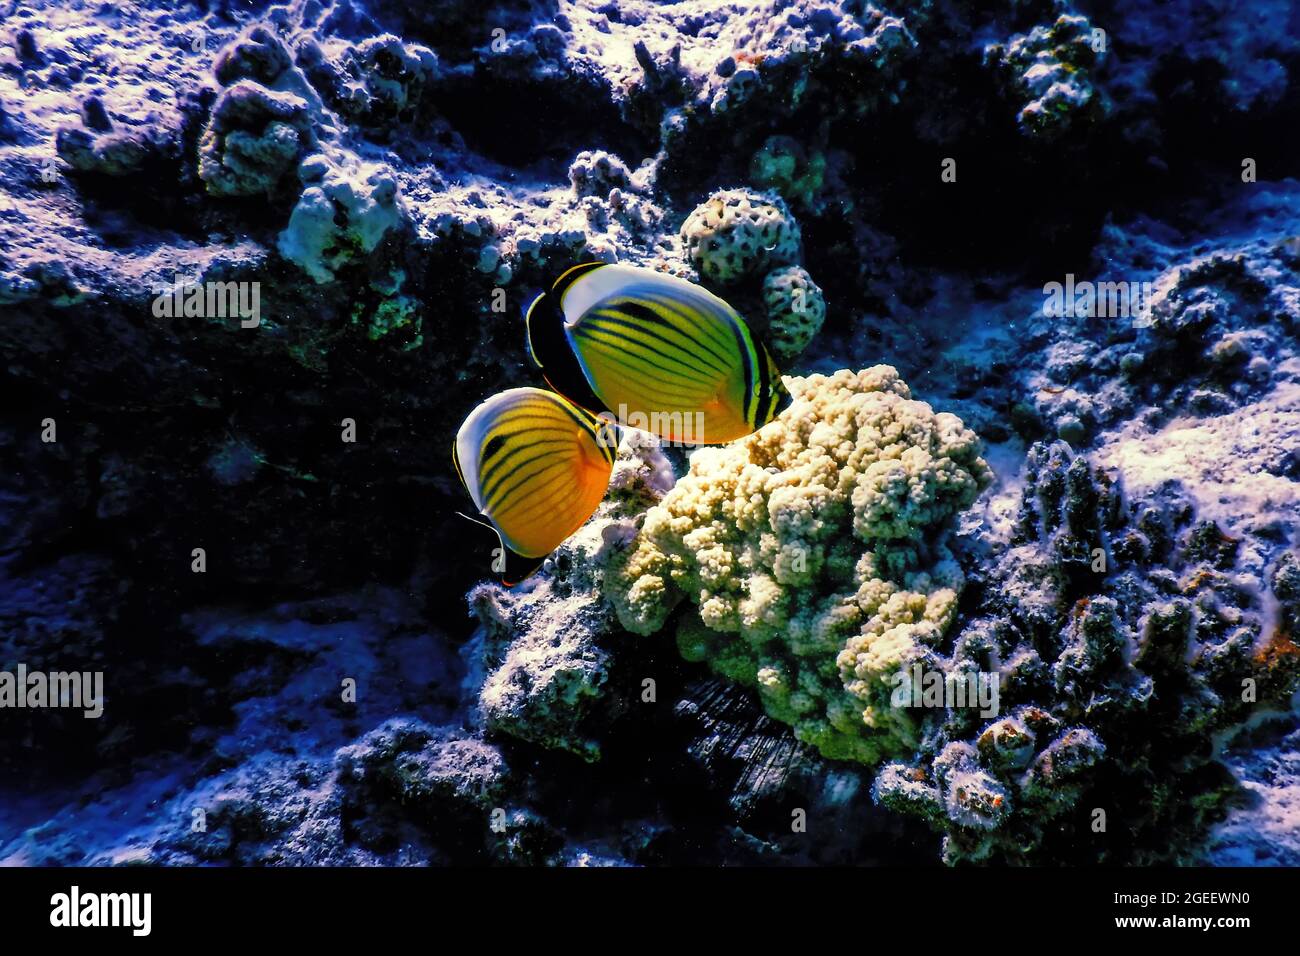 Black tailed butterflyfish (Chaetodon austriacus) Polyp butterflyfish, Coral fish, Tropical waters, Marine life Stock Photo